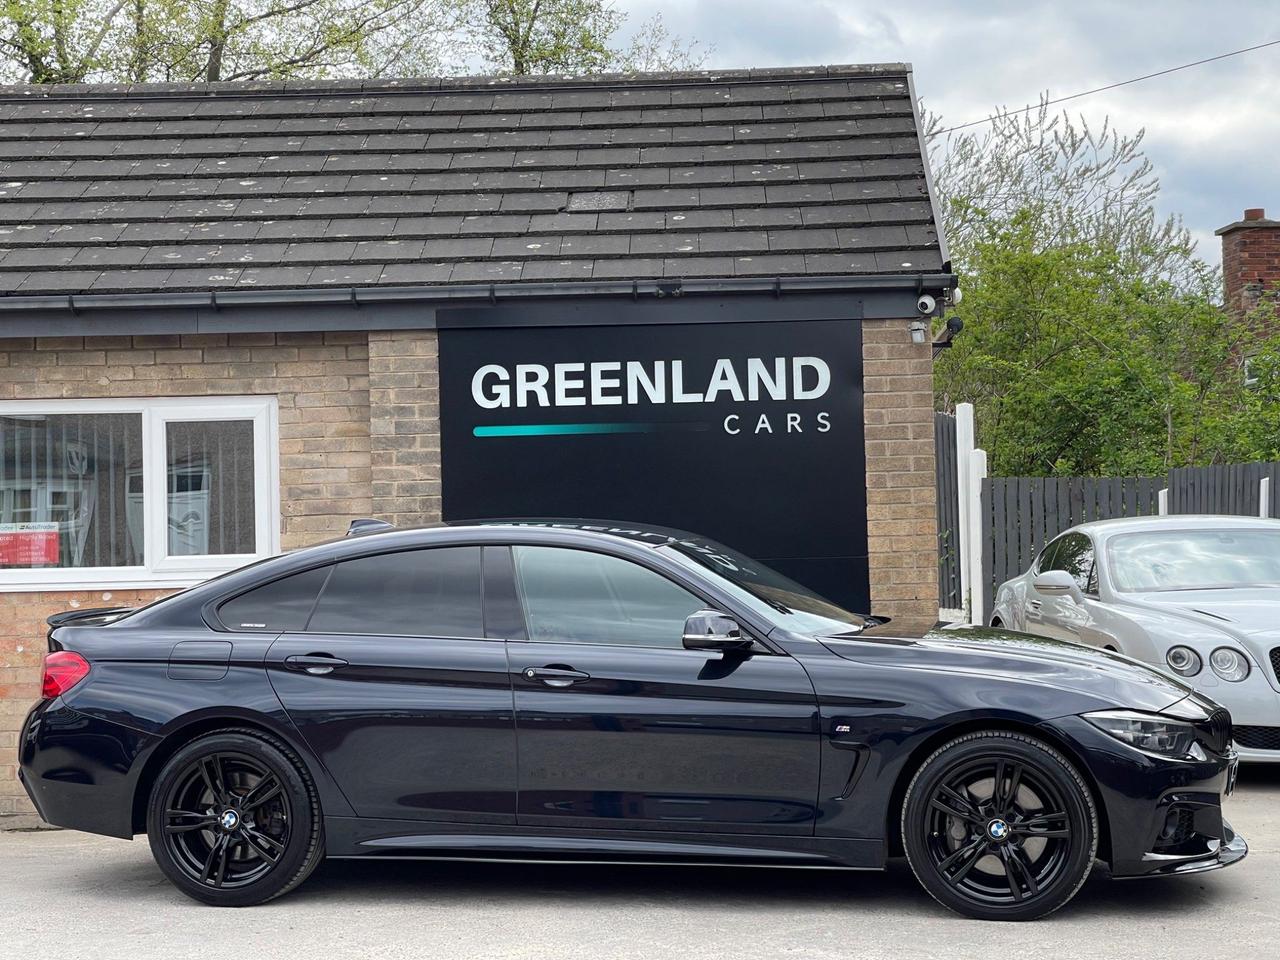 Used 2017 BMW 4 Series Gran Coupe for sale in Sheffield